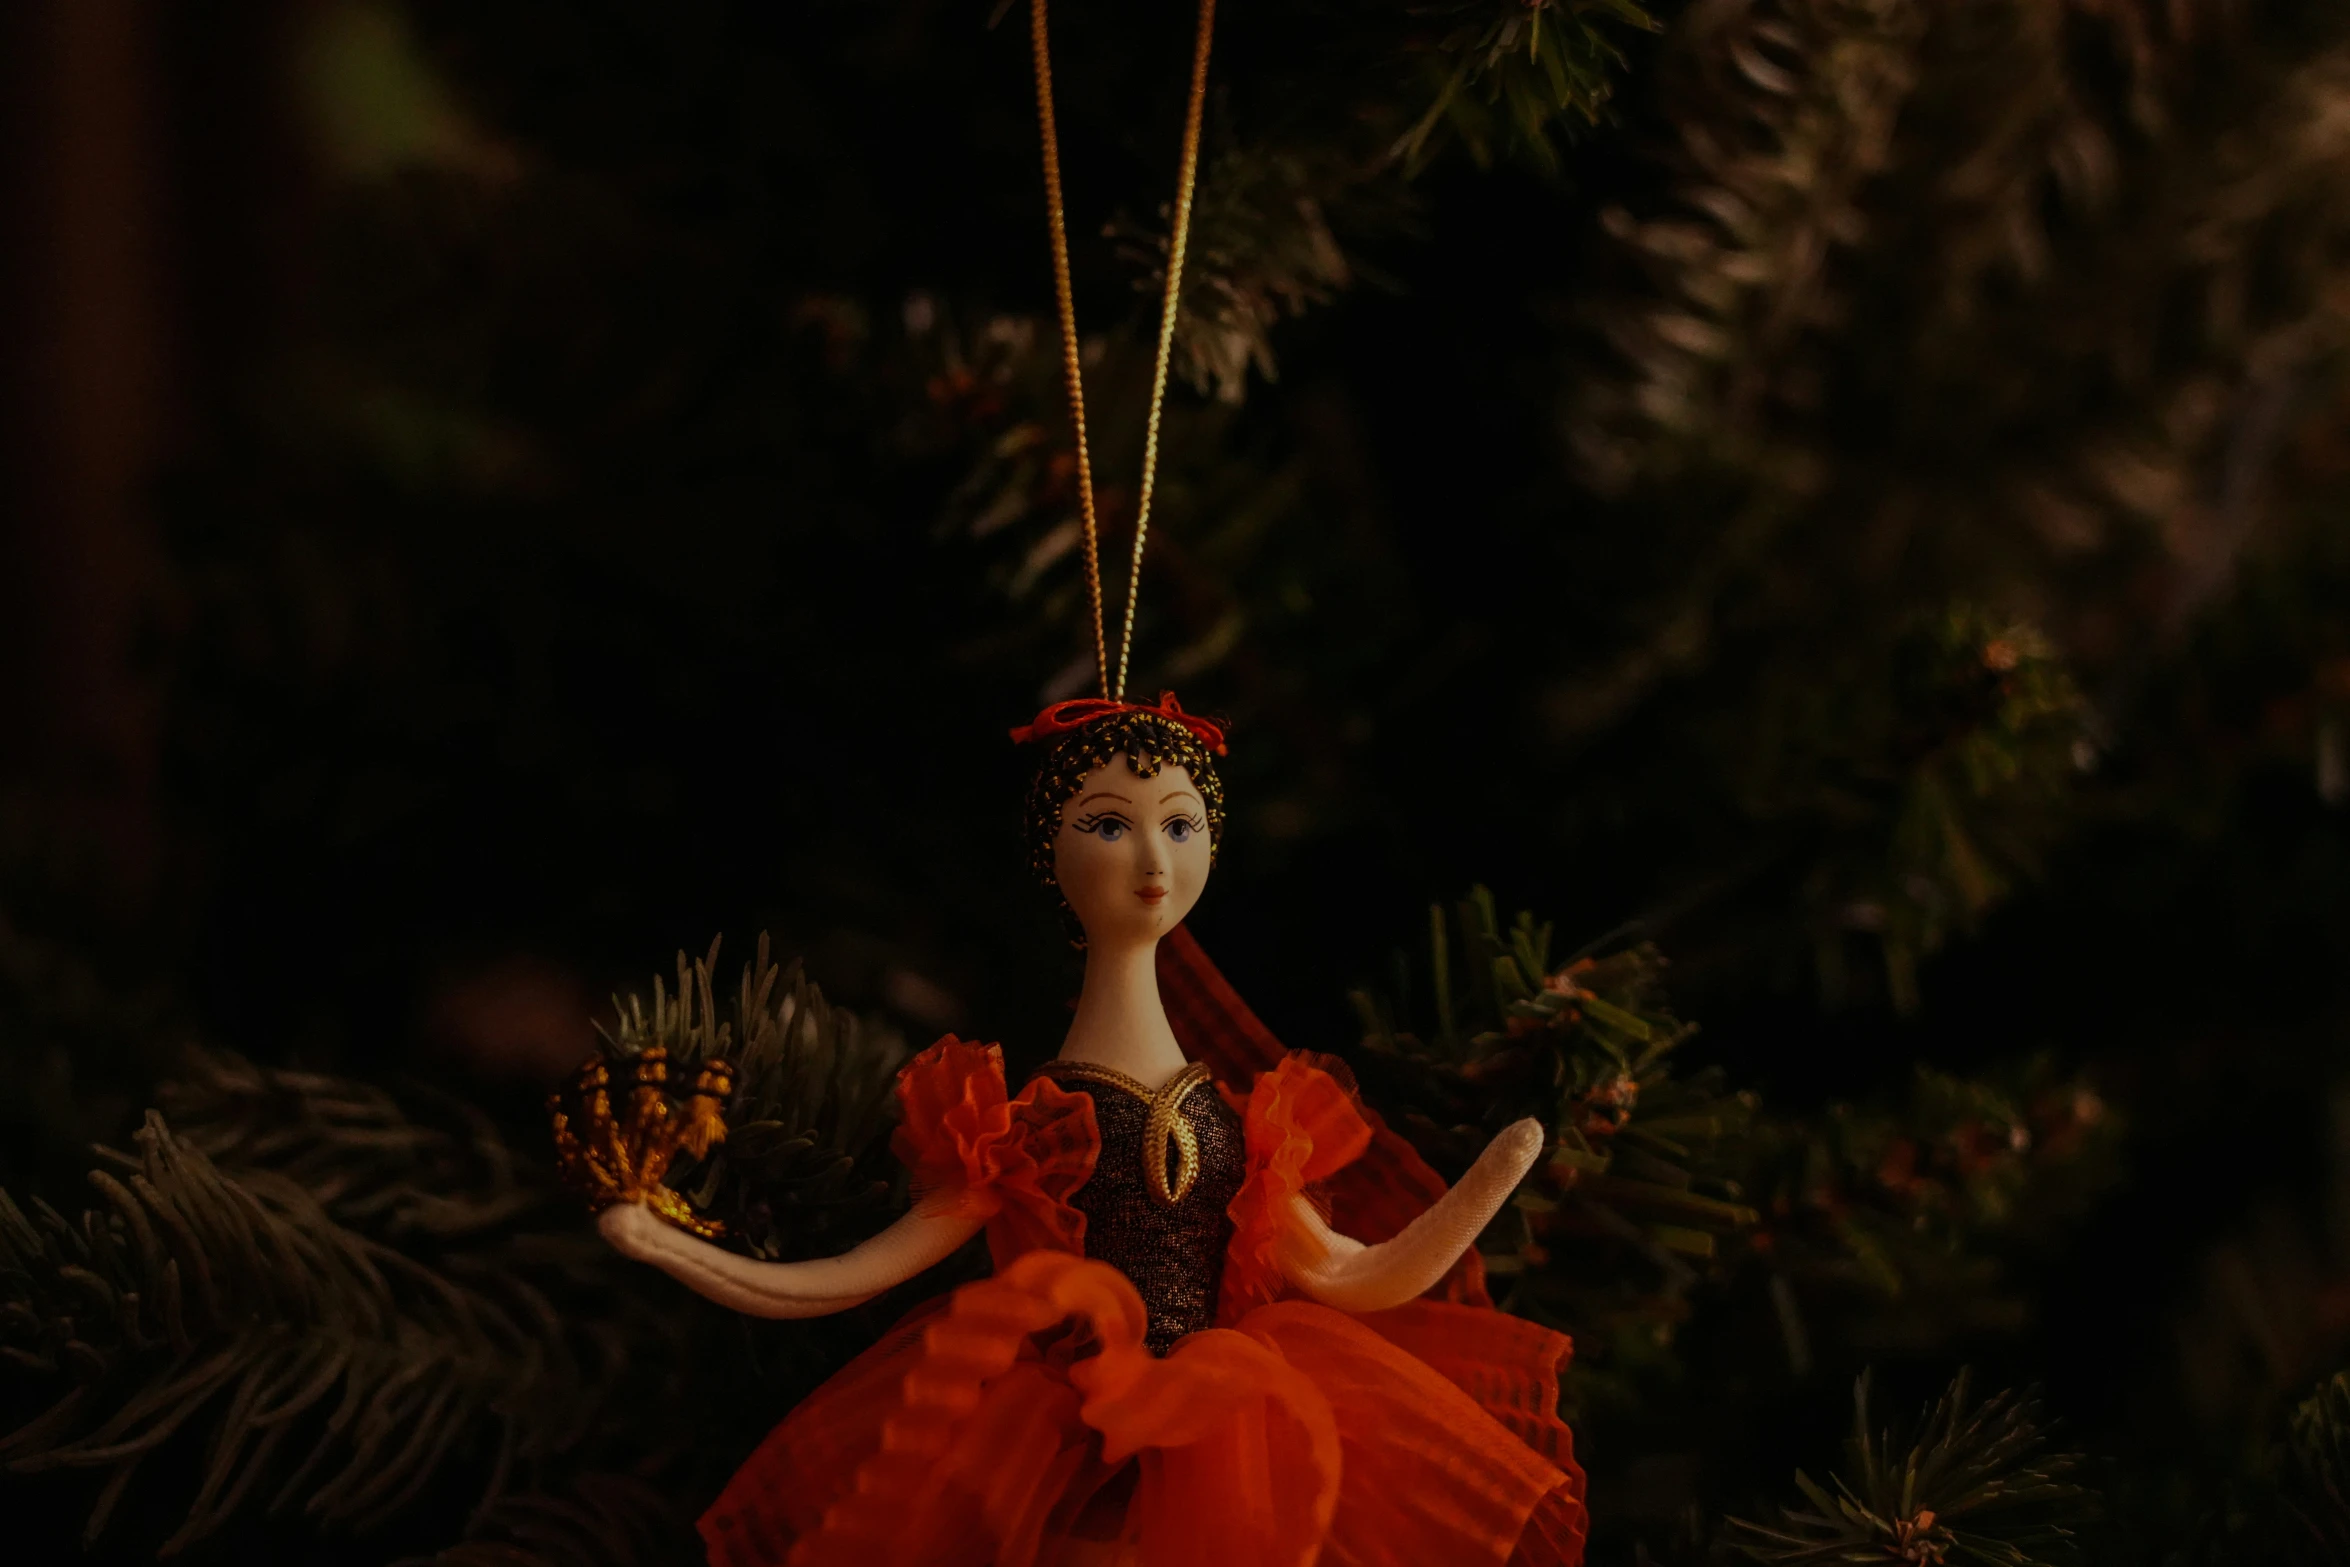 the doll is dressed in red and orange